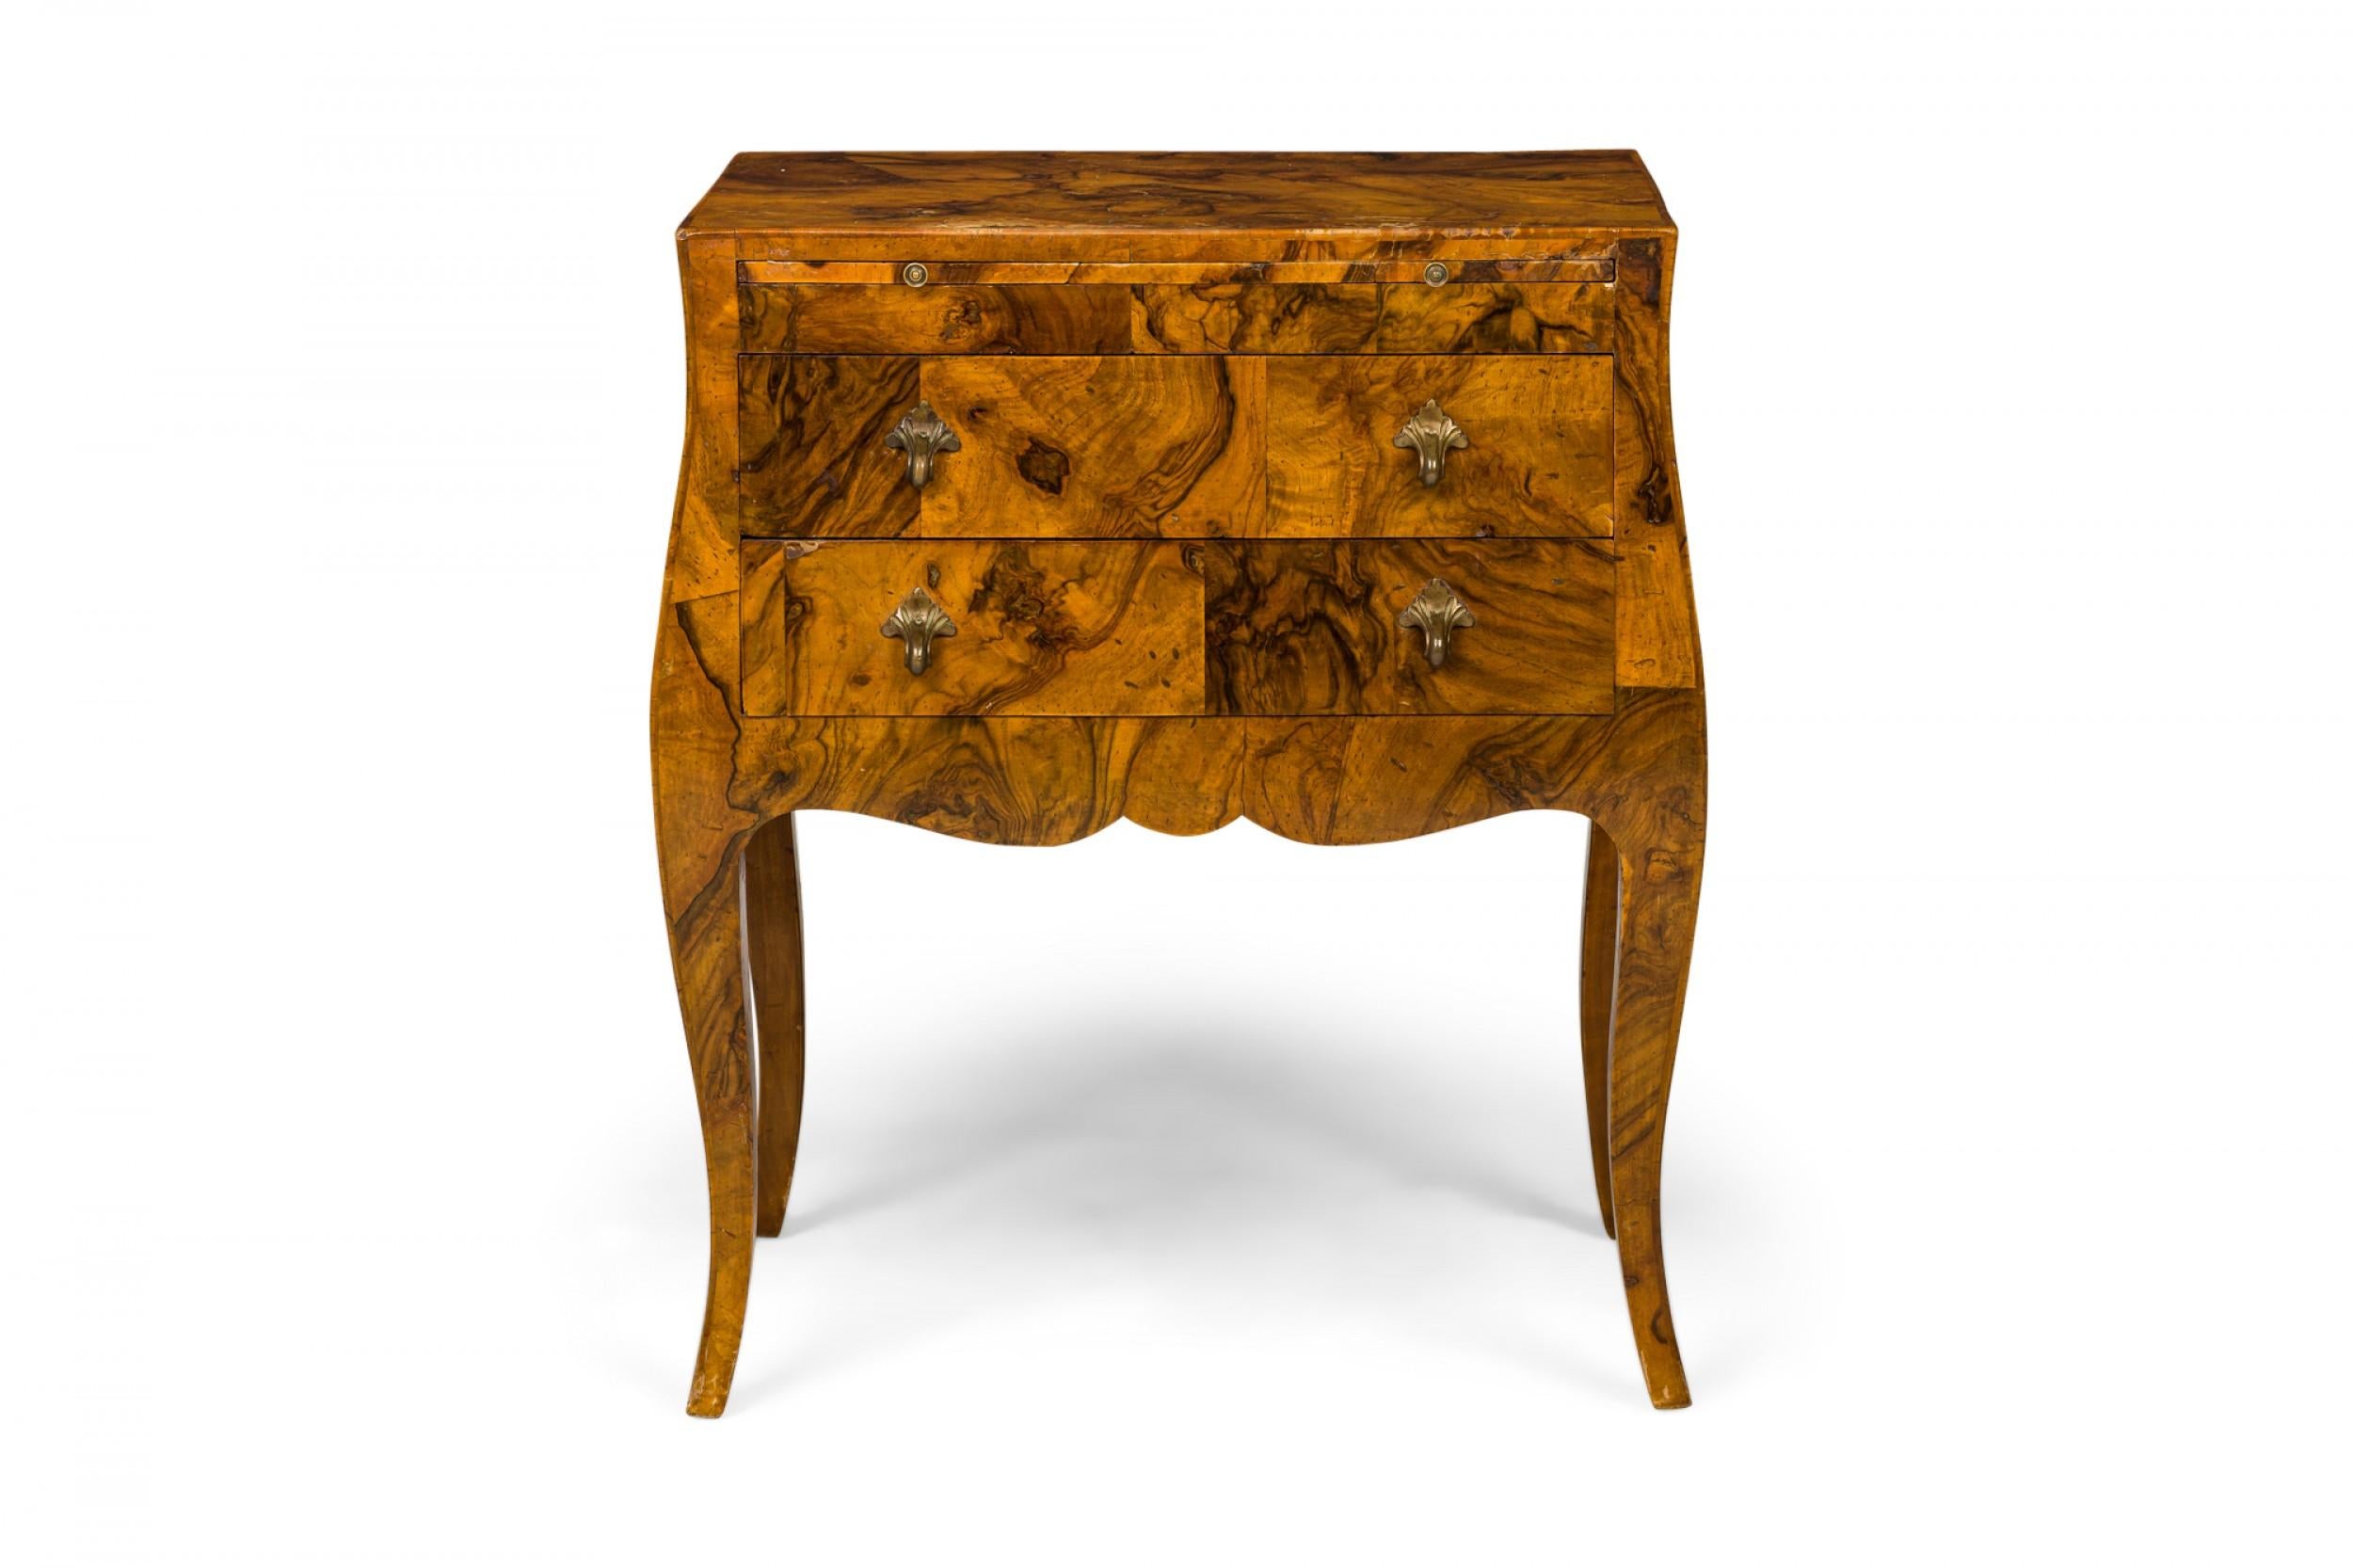 Italian Mid-Century small chest or side / end table with oyster burl veneer and two drawers with bronze drawer pulls, resting on four curved legs.